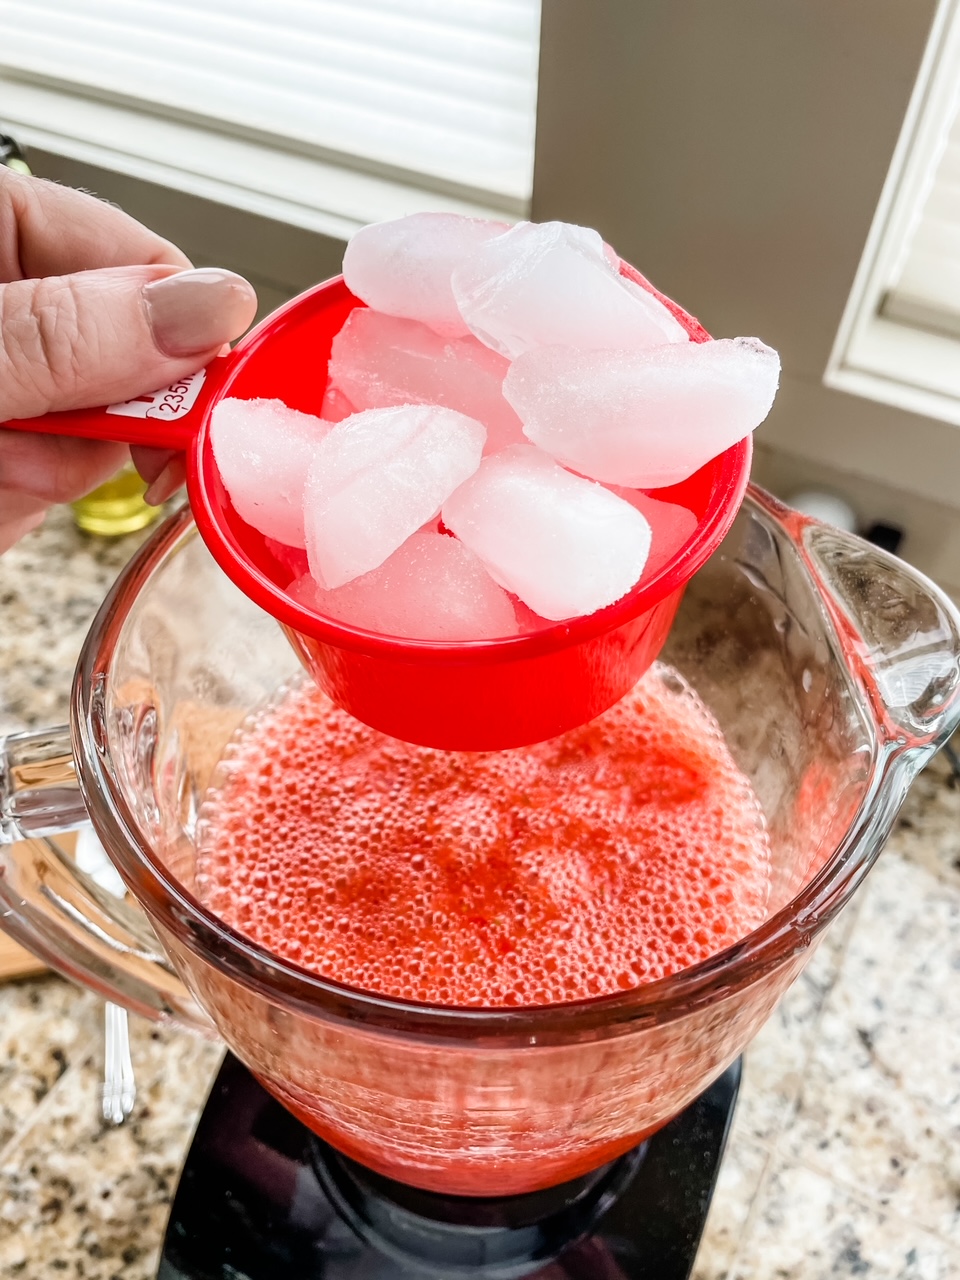 Marie holding a cupful of ice over the mixture-filled blender